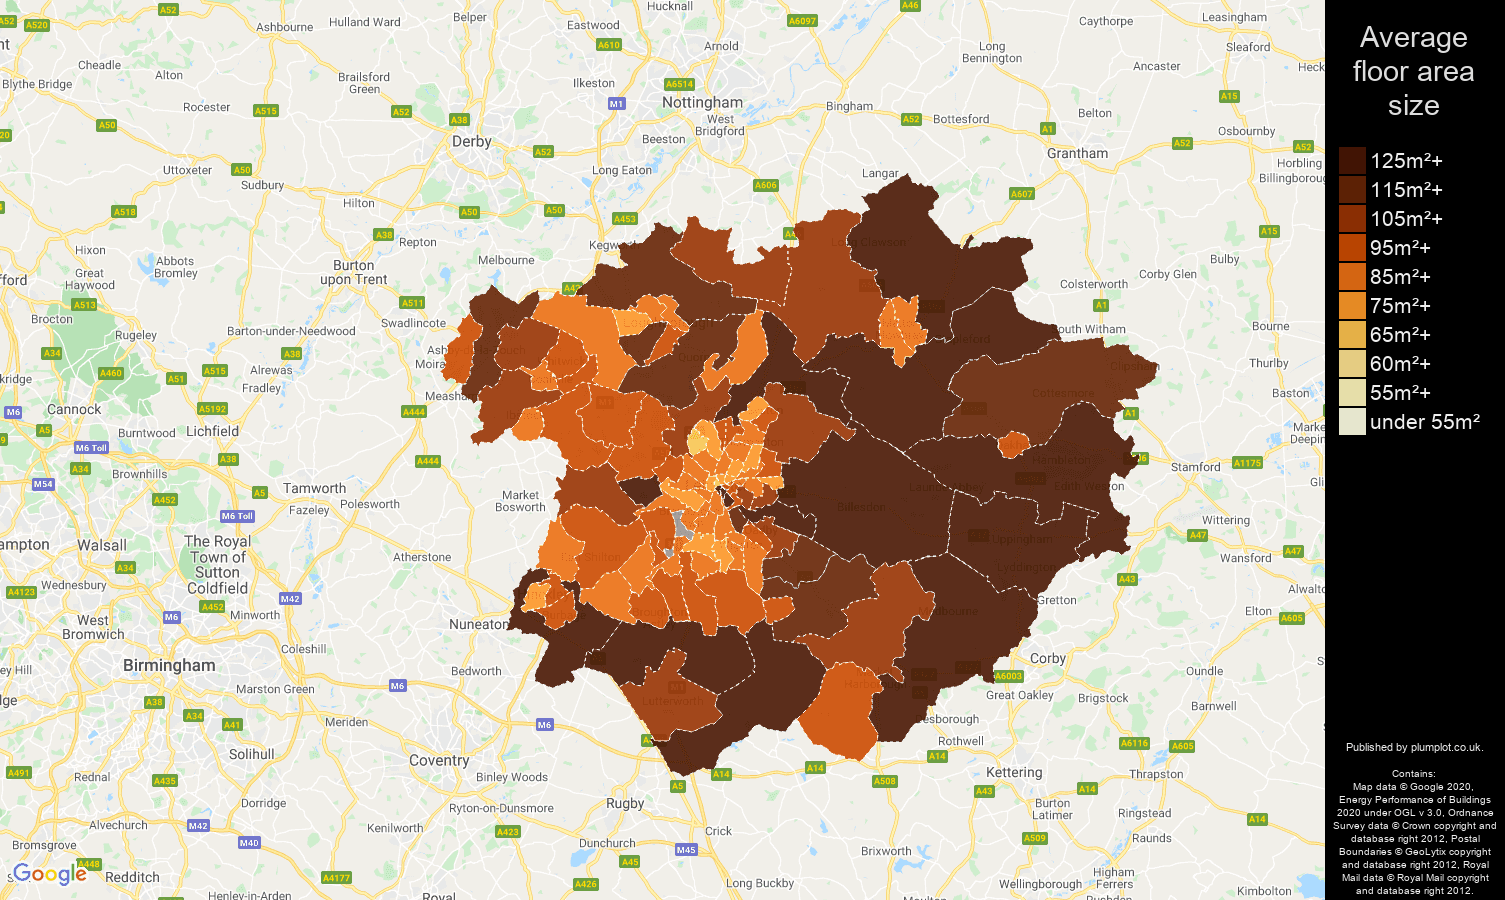 Leicester map of average floor area size of houses